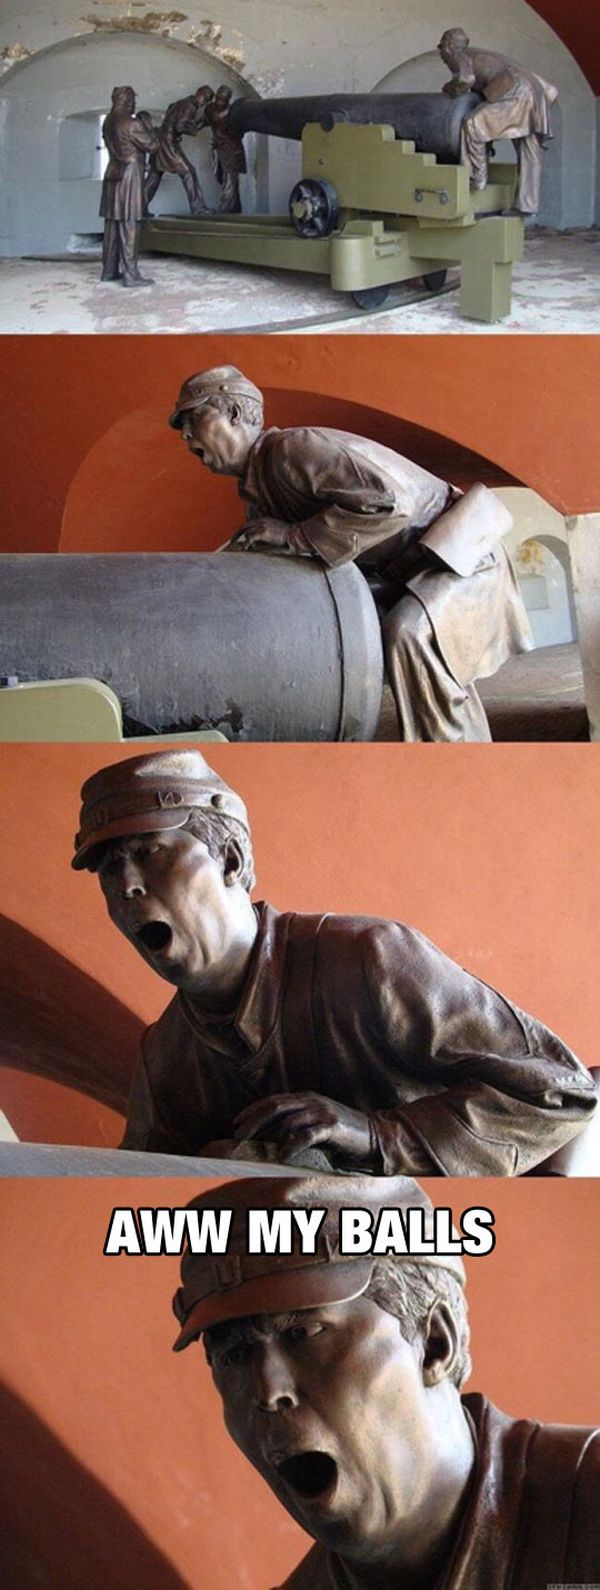 What Was The Sculptor Thinking?